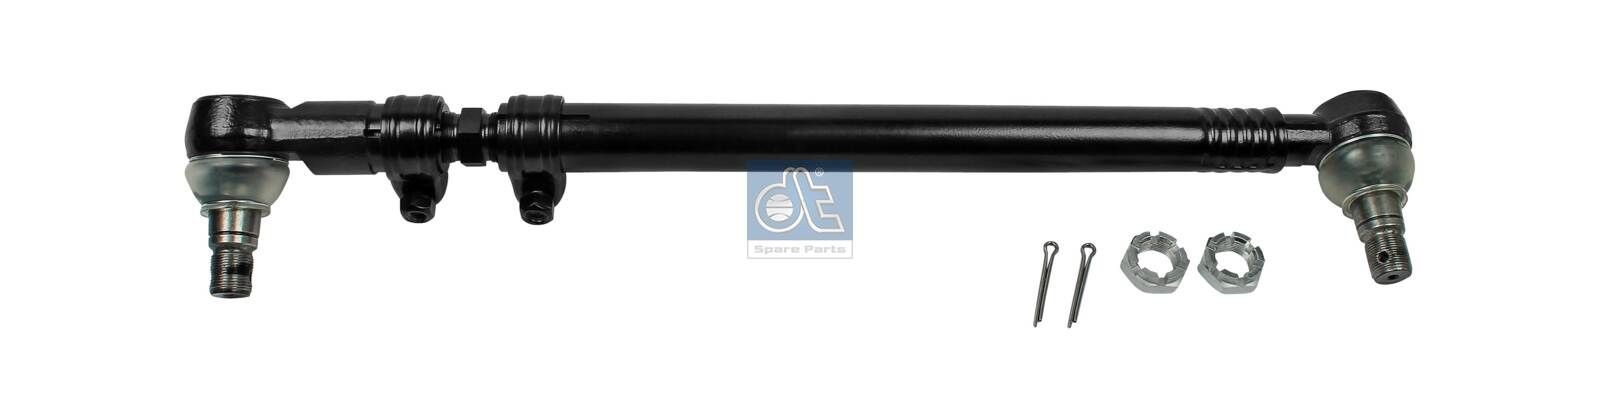 Great value for money - DT Spare Parts Rod Assembly 4.65666